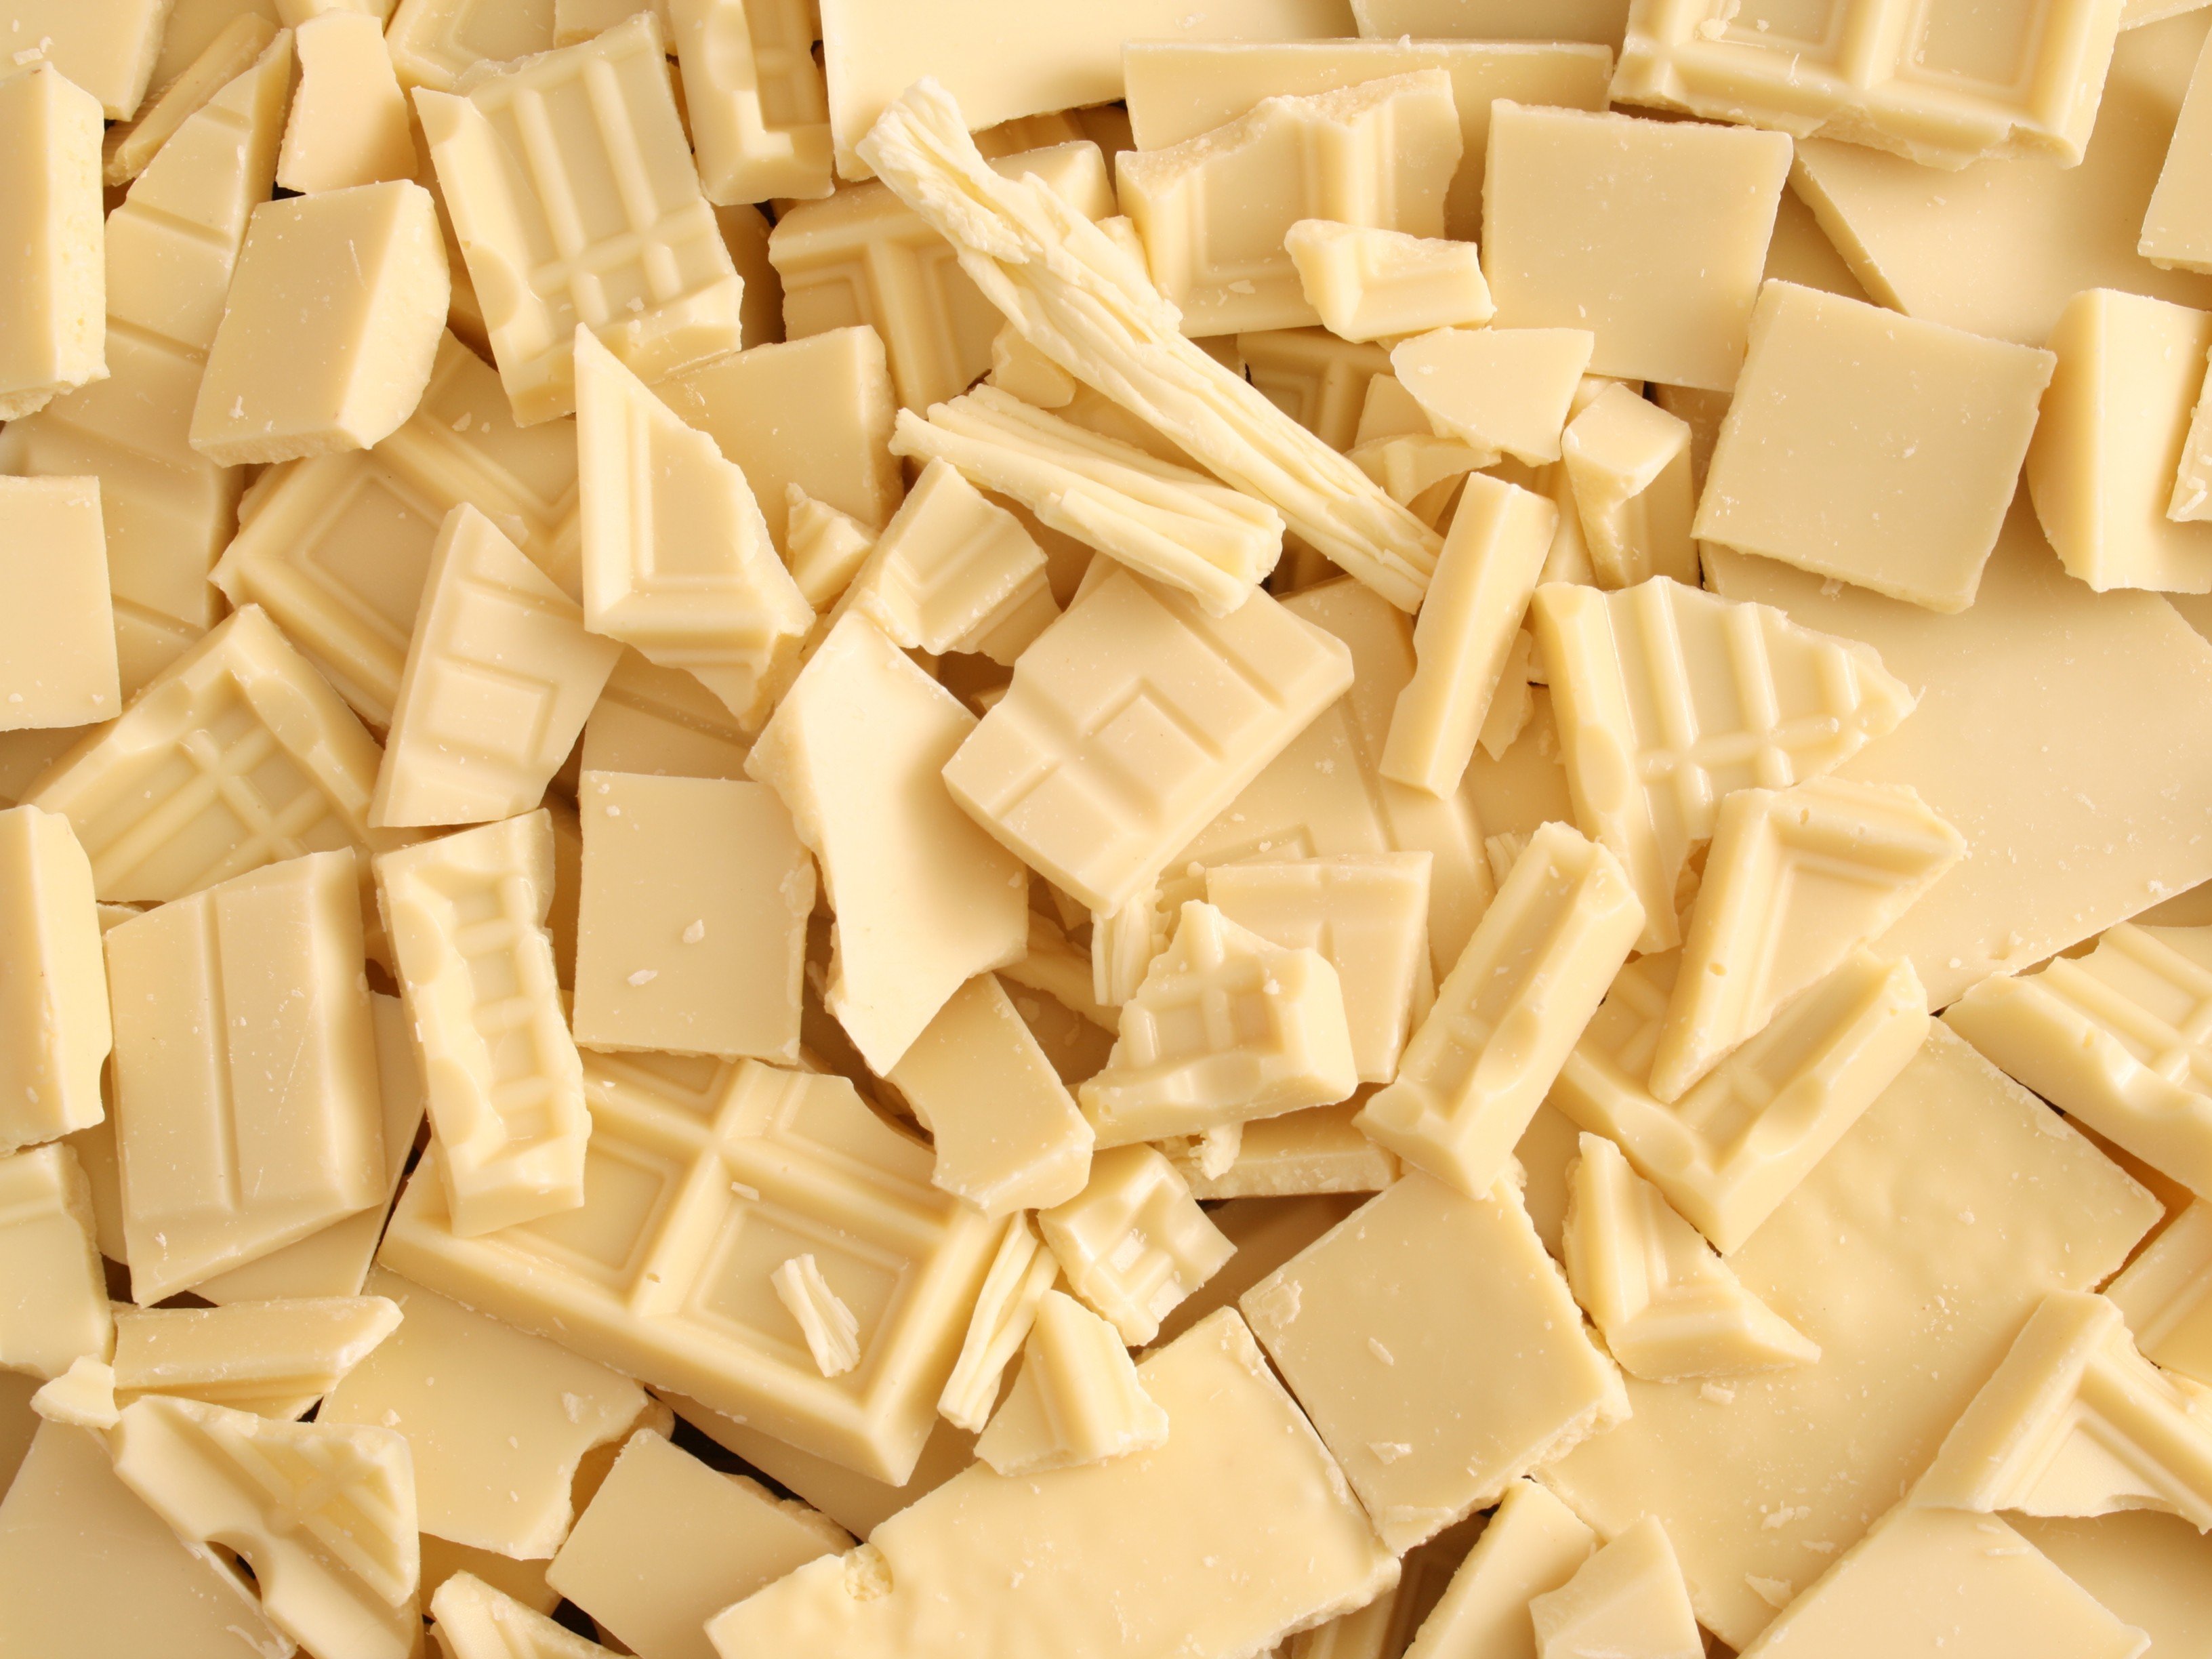 White chocolate started out as the coating for pills and evolved into a sweet treat.